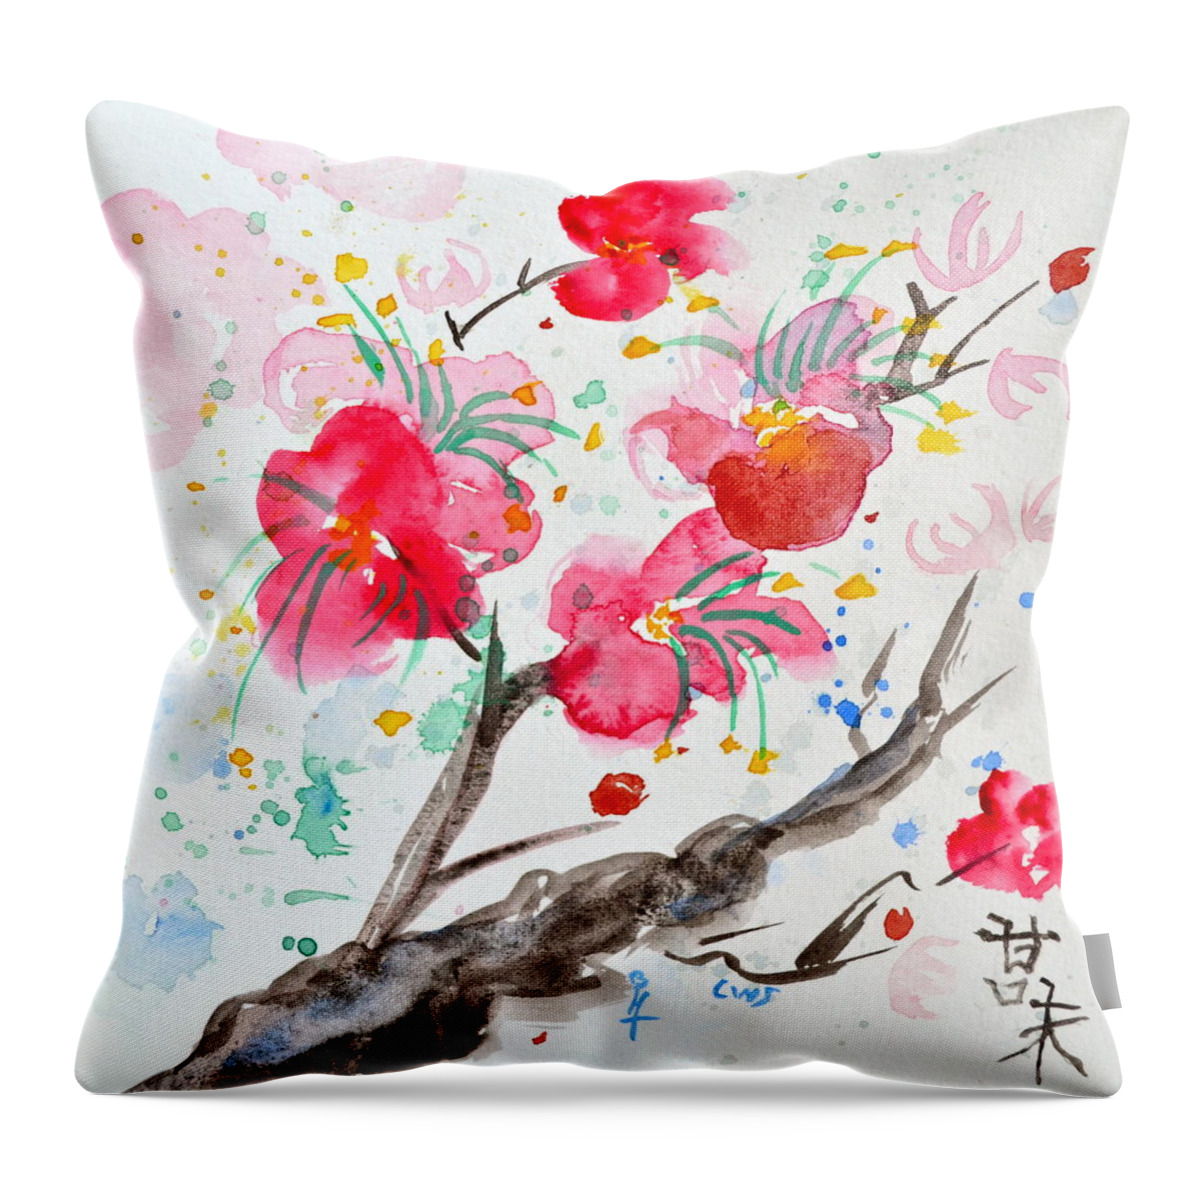 Amami Throw Pillow featuring the painting Amami or Sweetness by Beverley Harper Tinsley